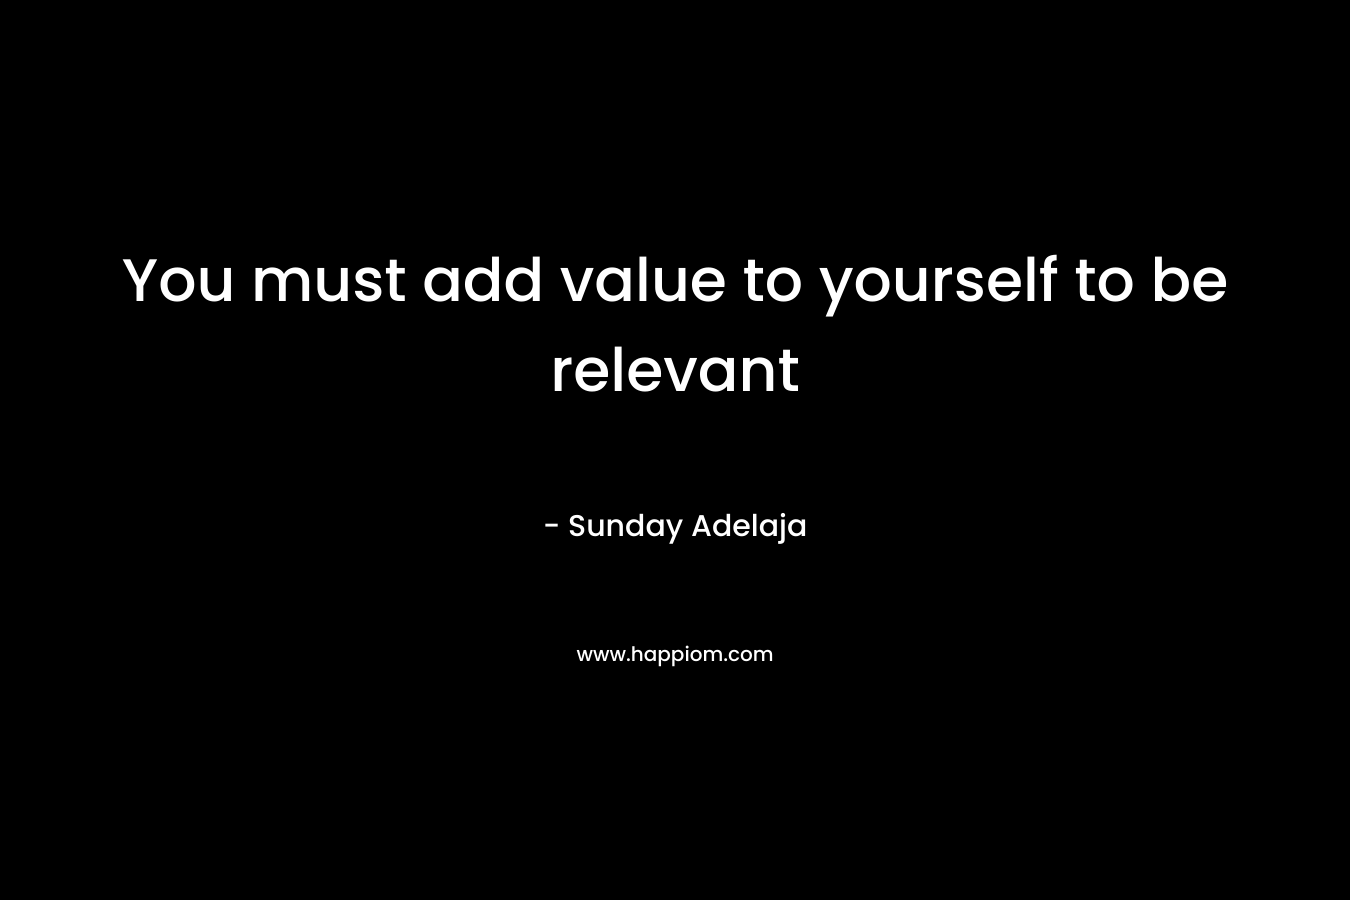 You must add value to yourself to be relevant